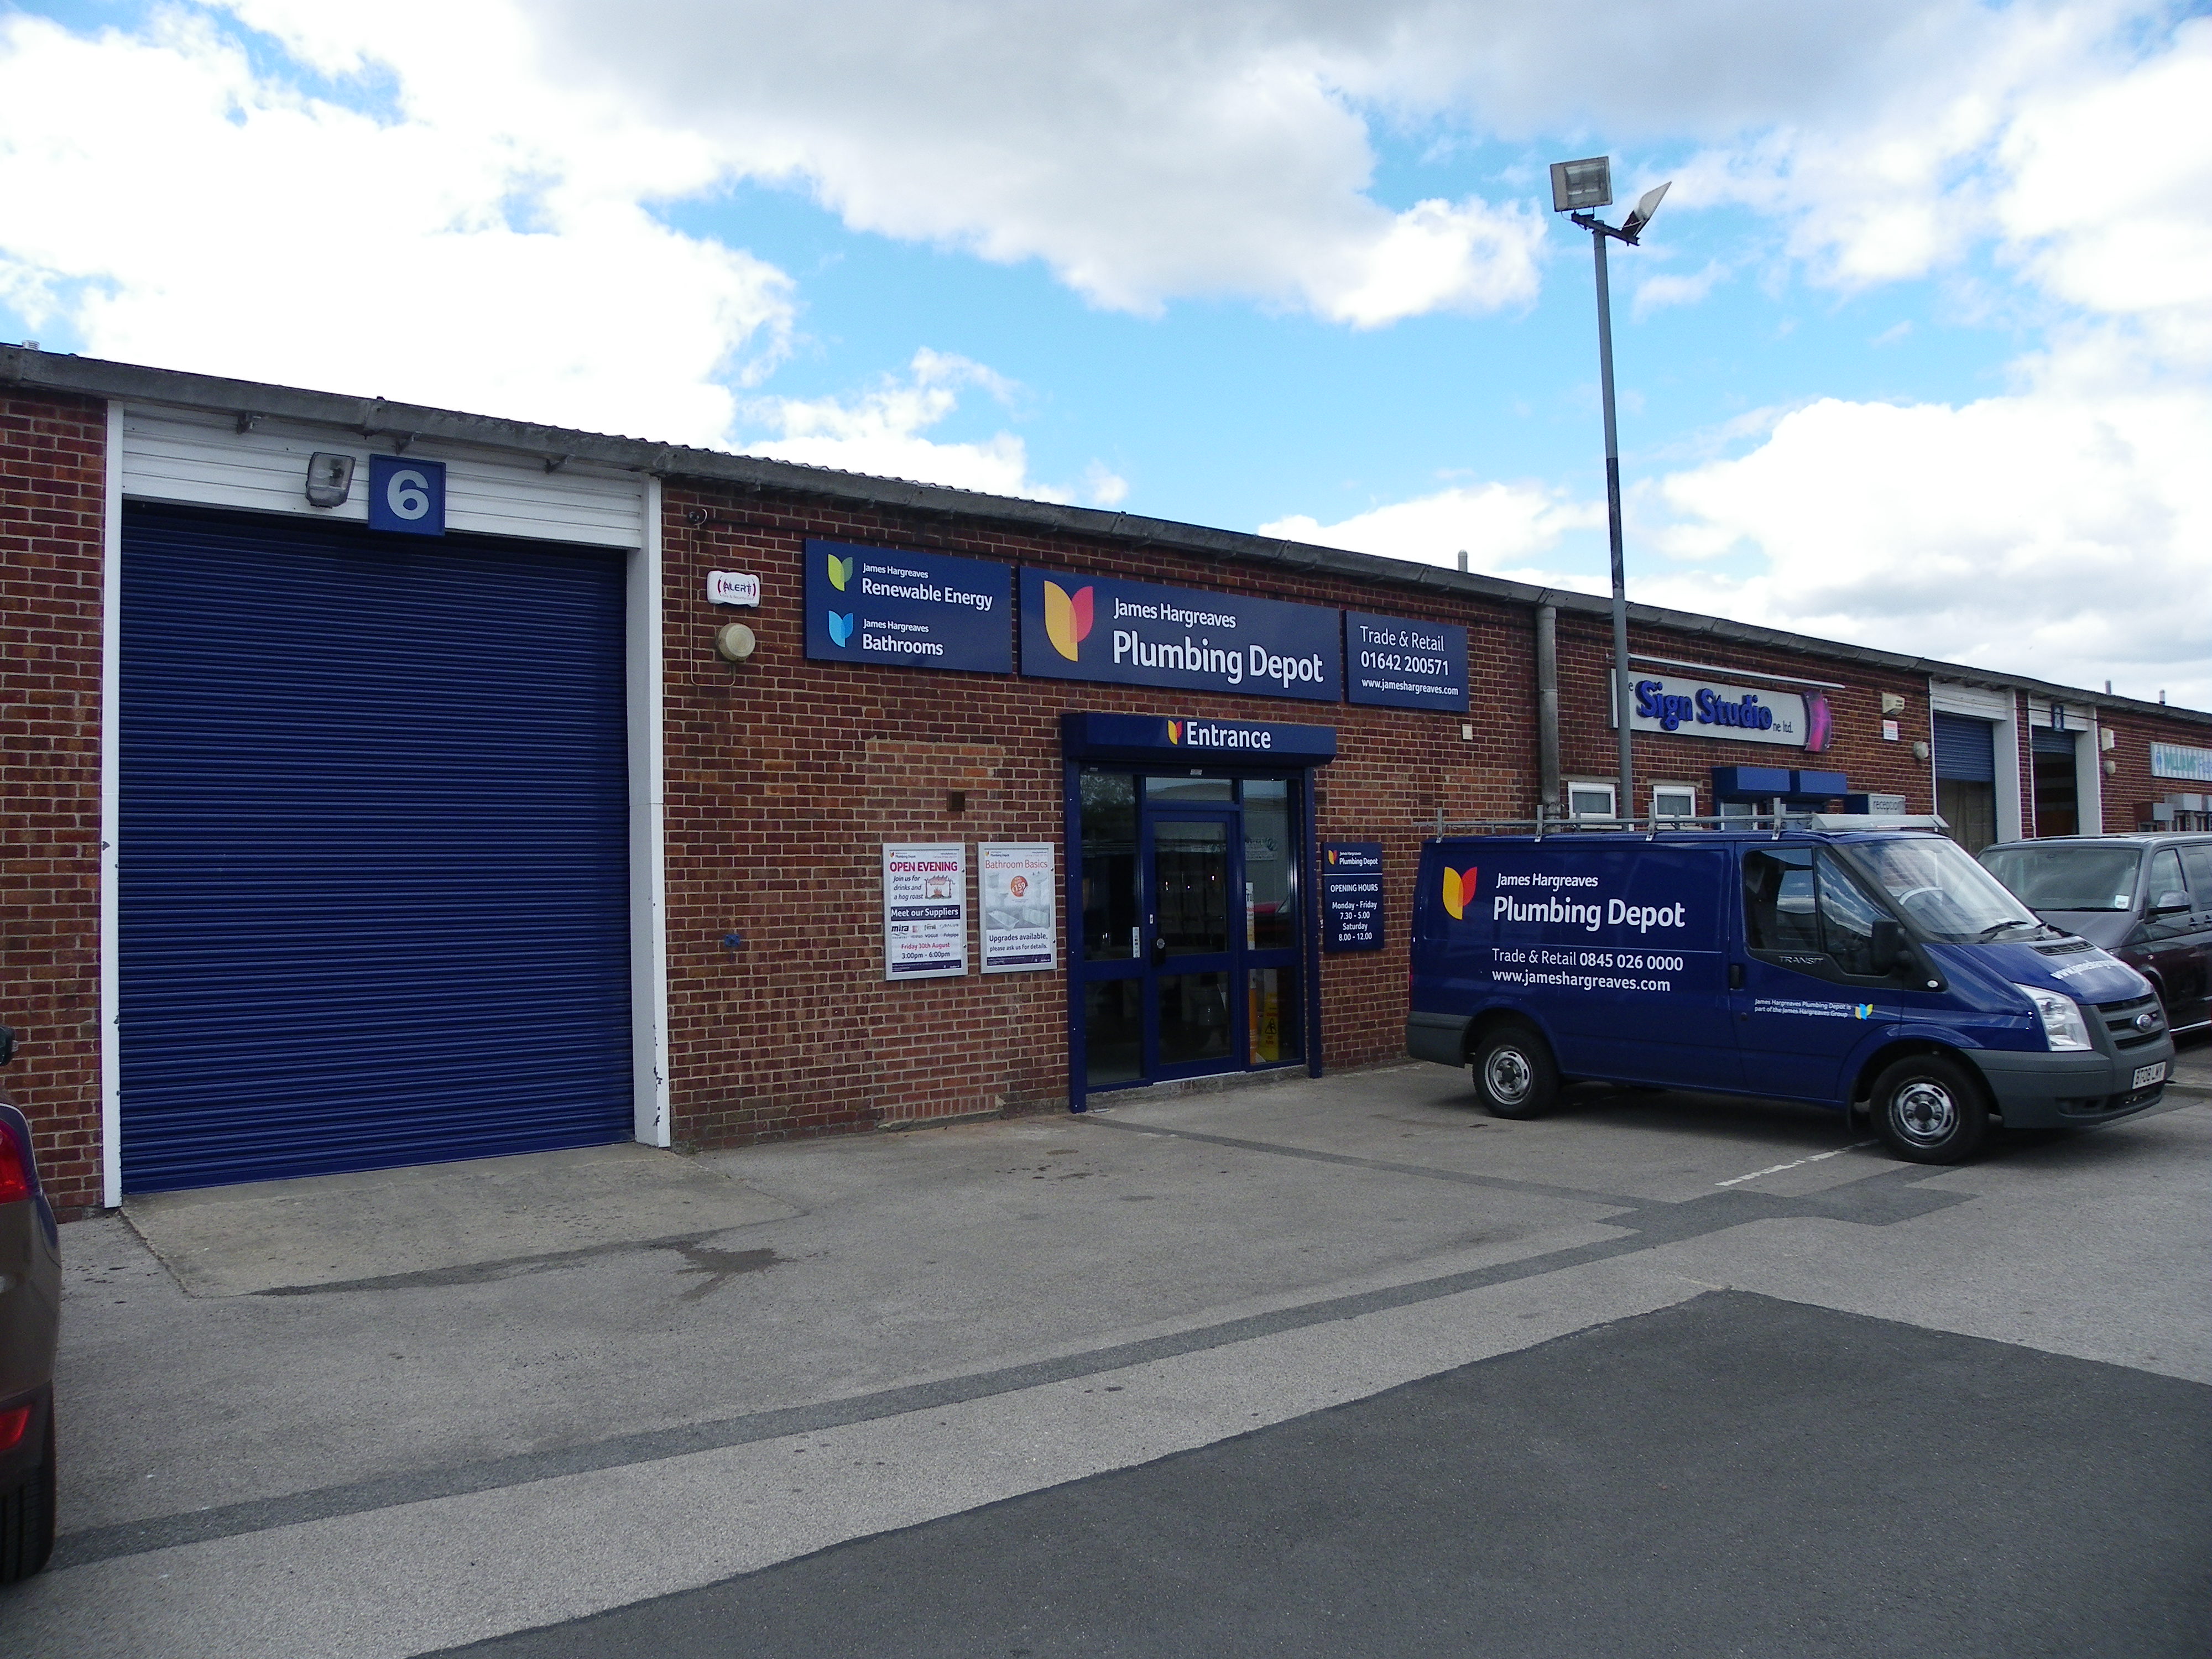 New Plumbing Depot branch in Middlesbrough